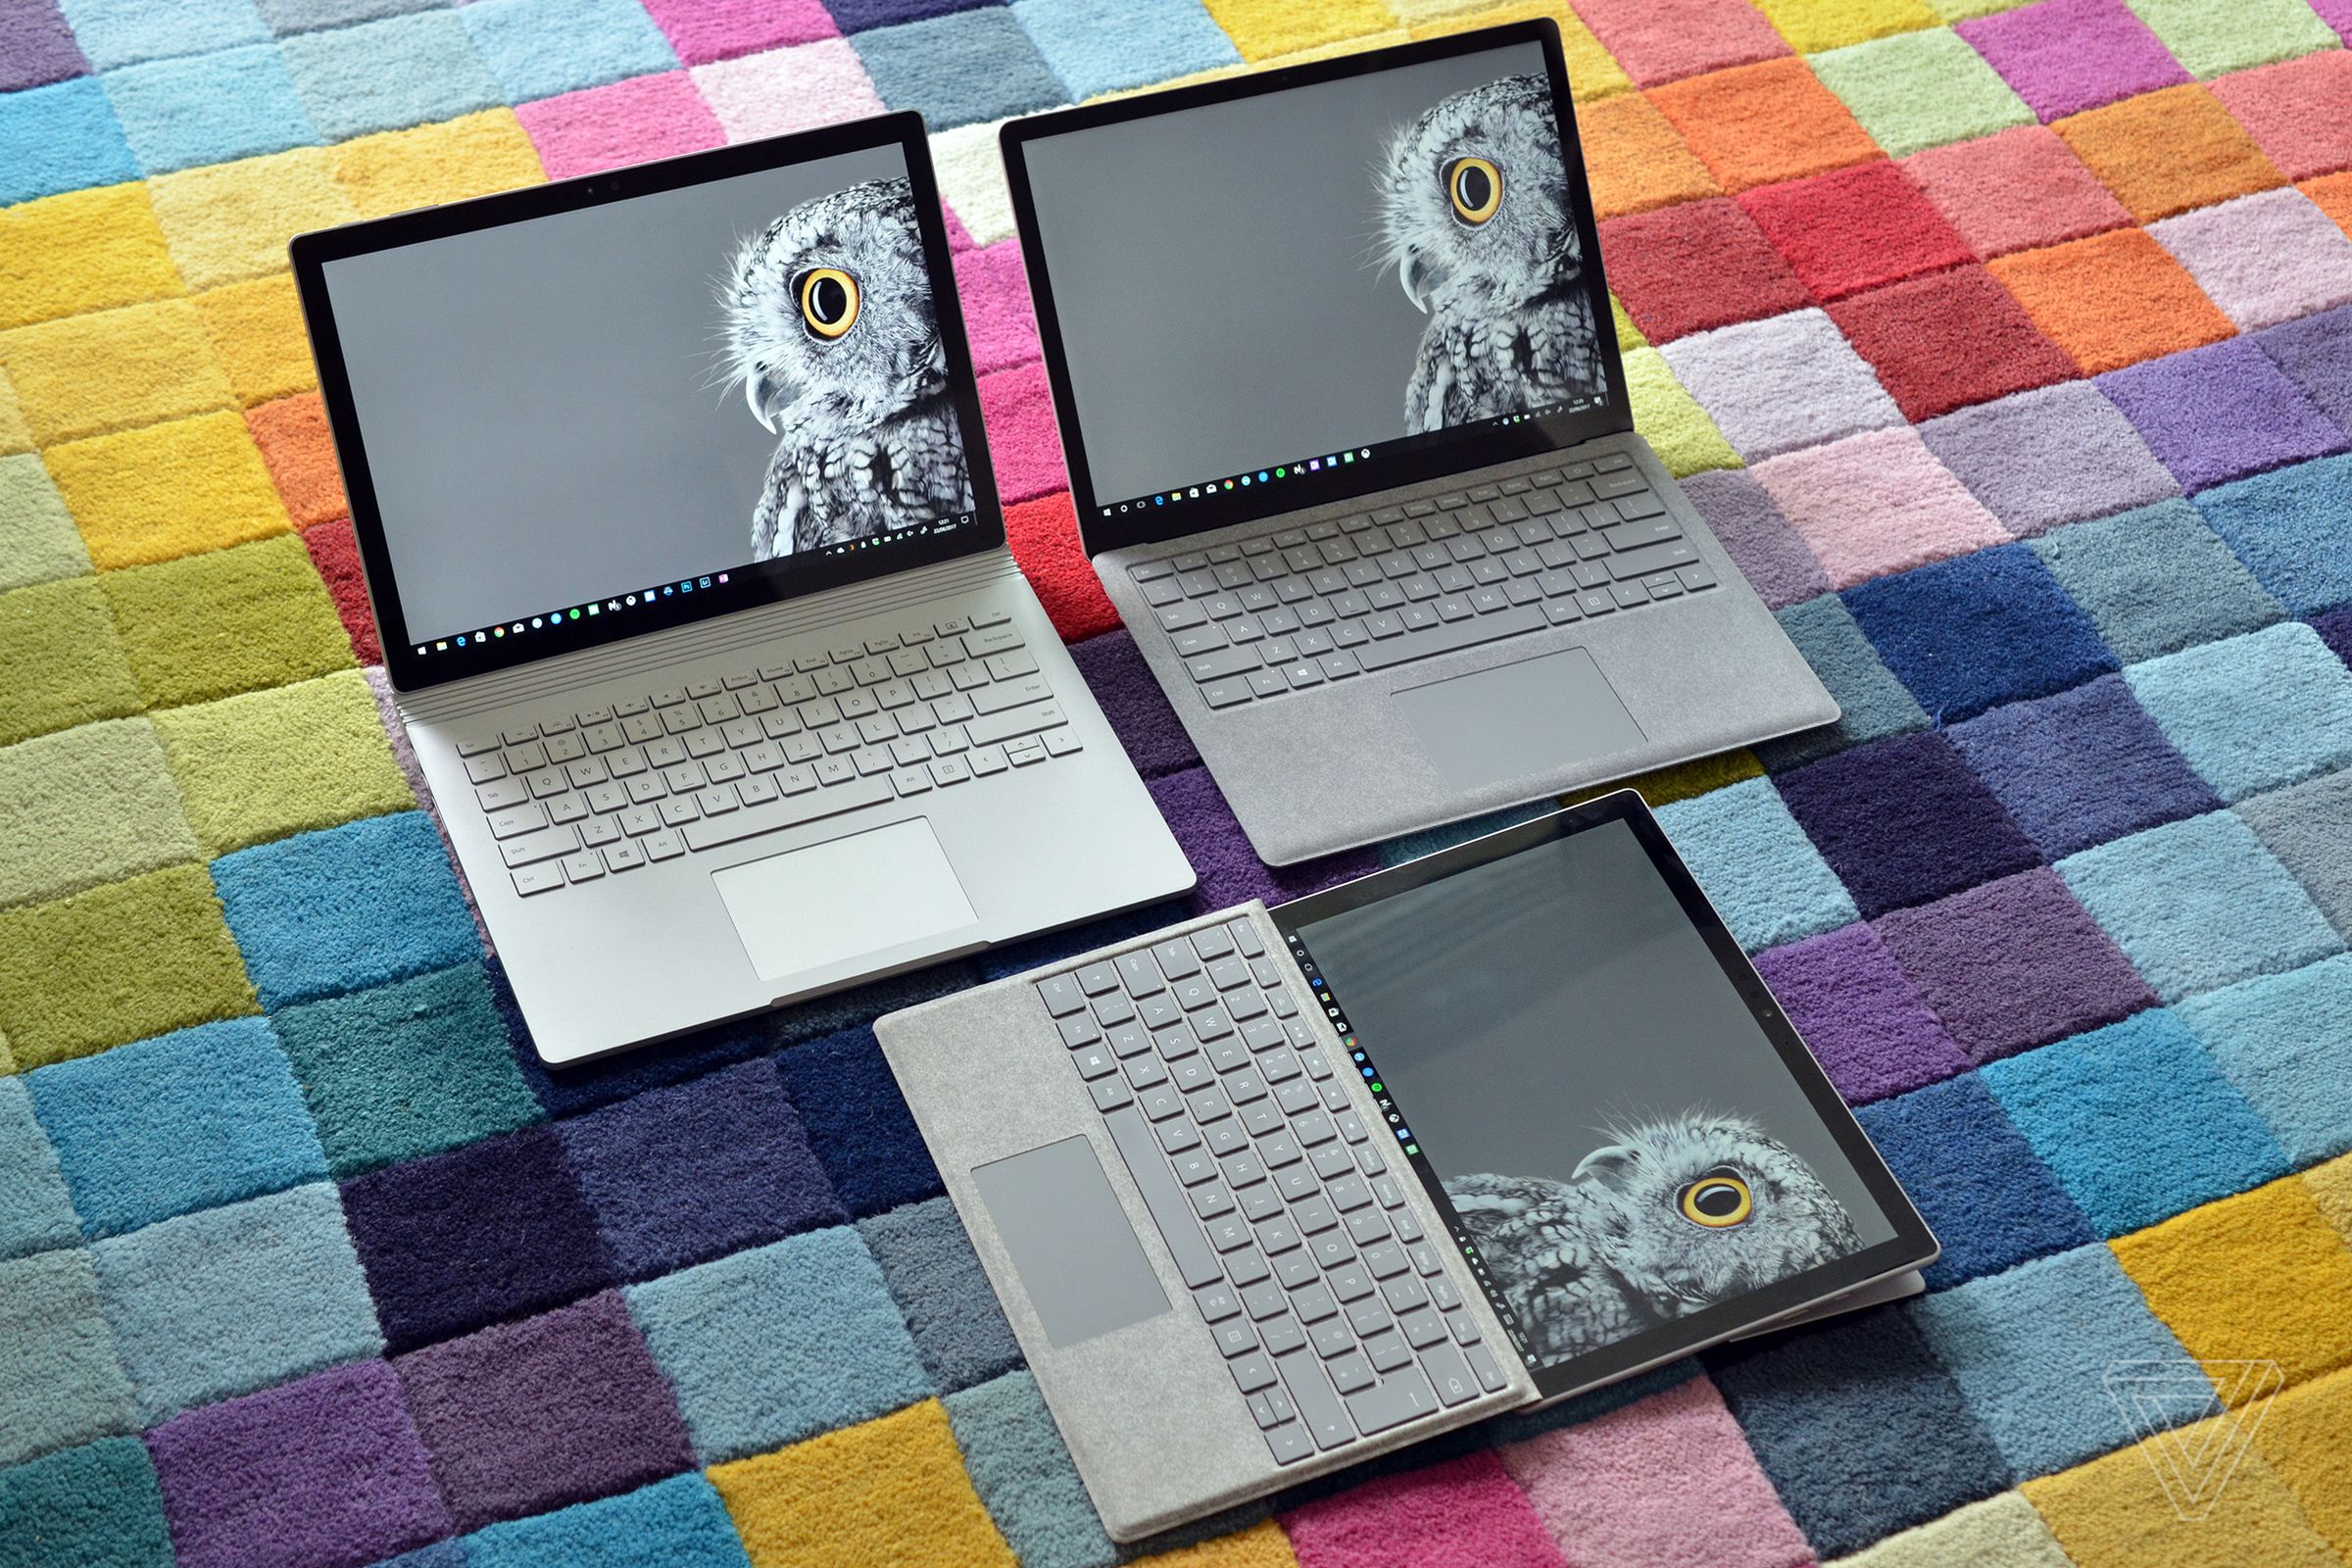 A photo of multiple Surface devices on a colorful rug